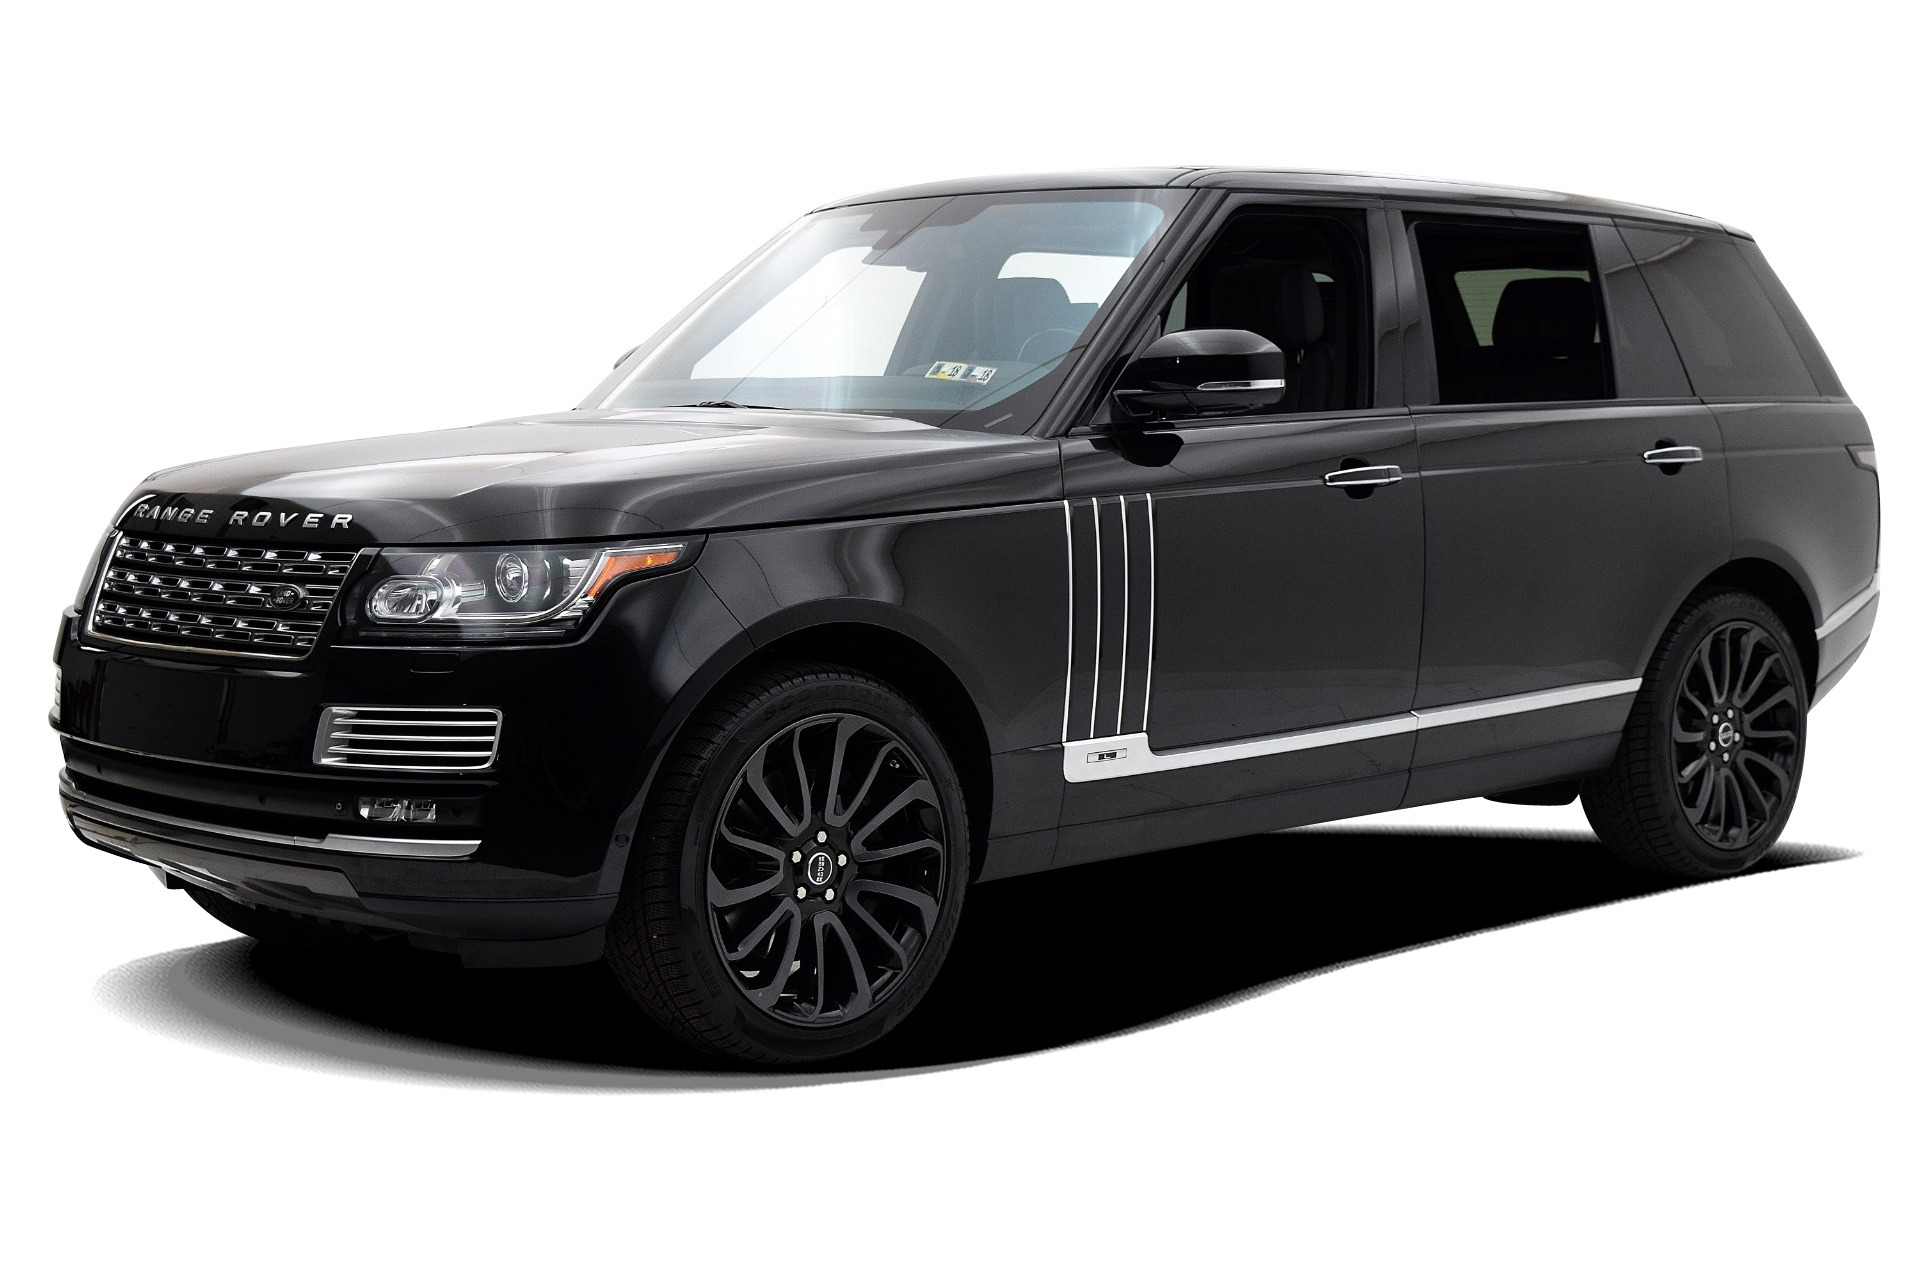 Used 2015 Land Rover Range Autobiography LWB For | FC Kerbeck Stock #17BE106AEB